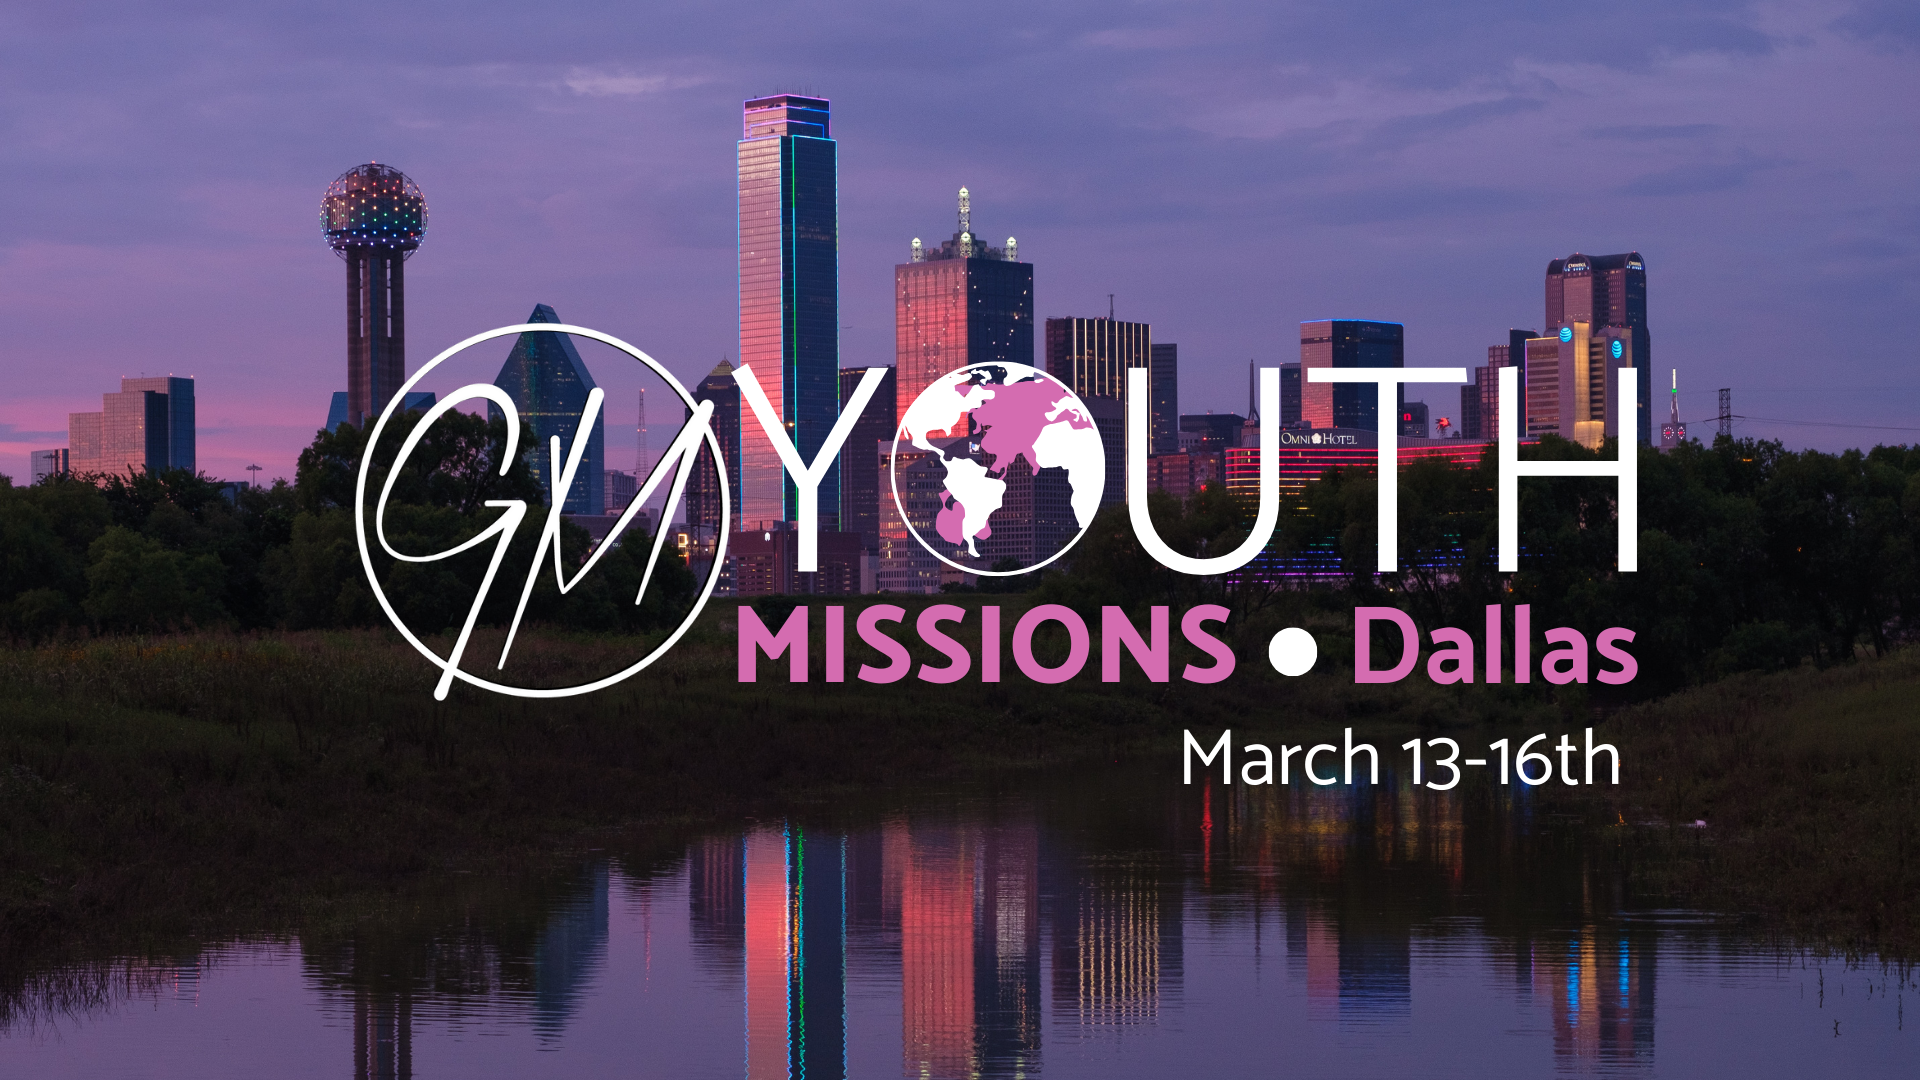 GM Youth Missions - Dallas